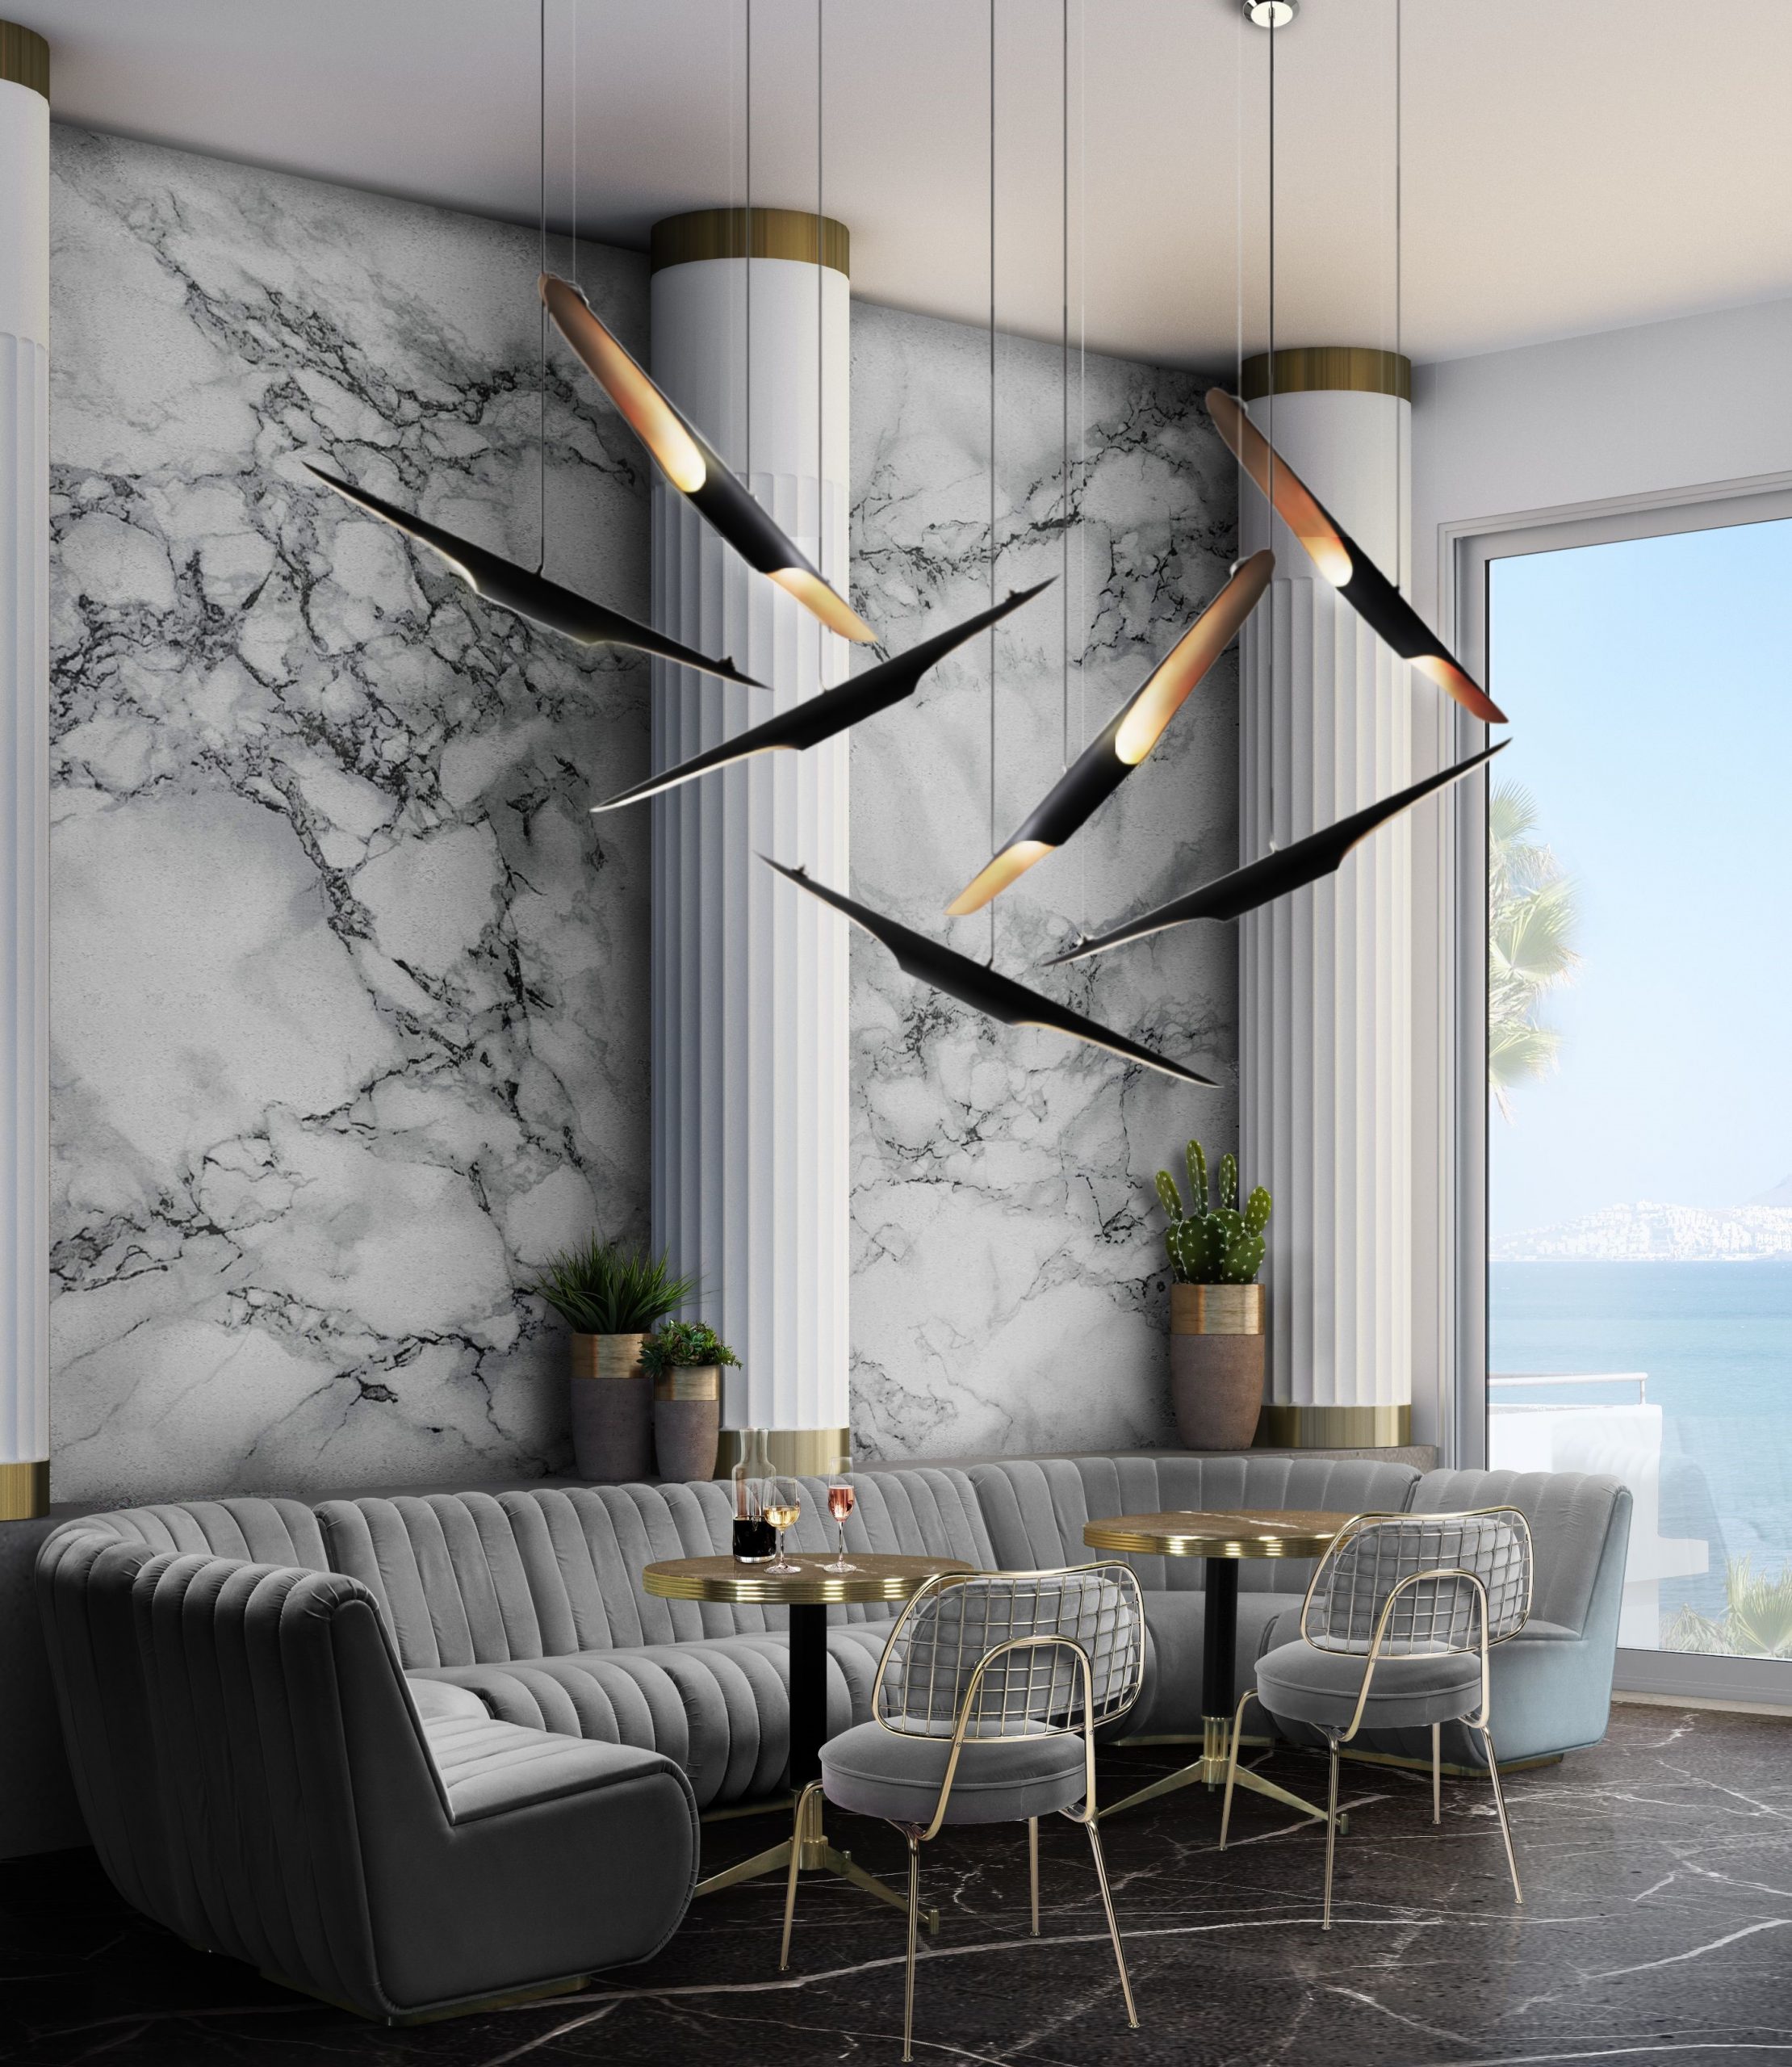 Lighting Inspiration: The Perfect Lighting For Your Hospitality Project